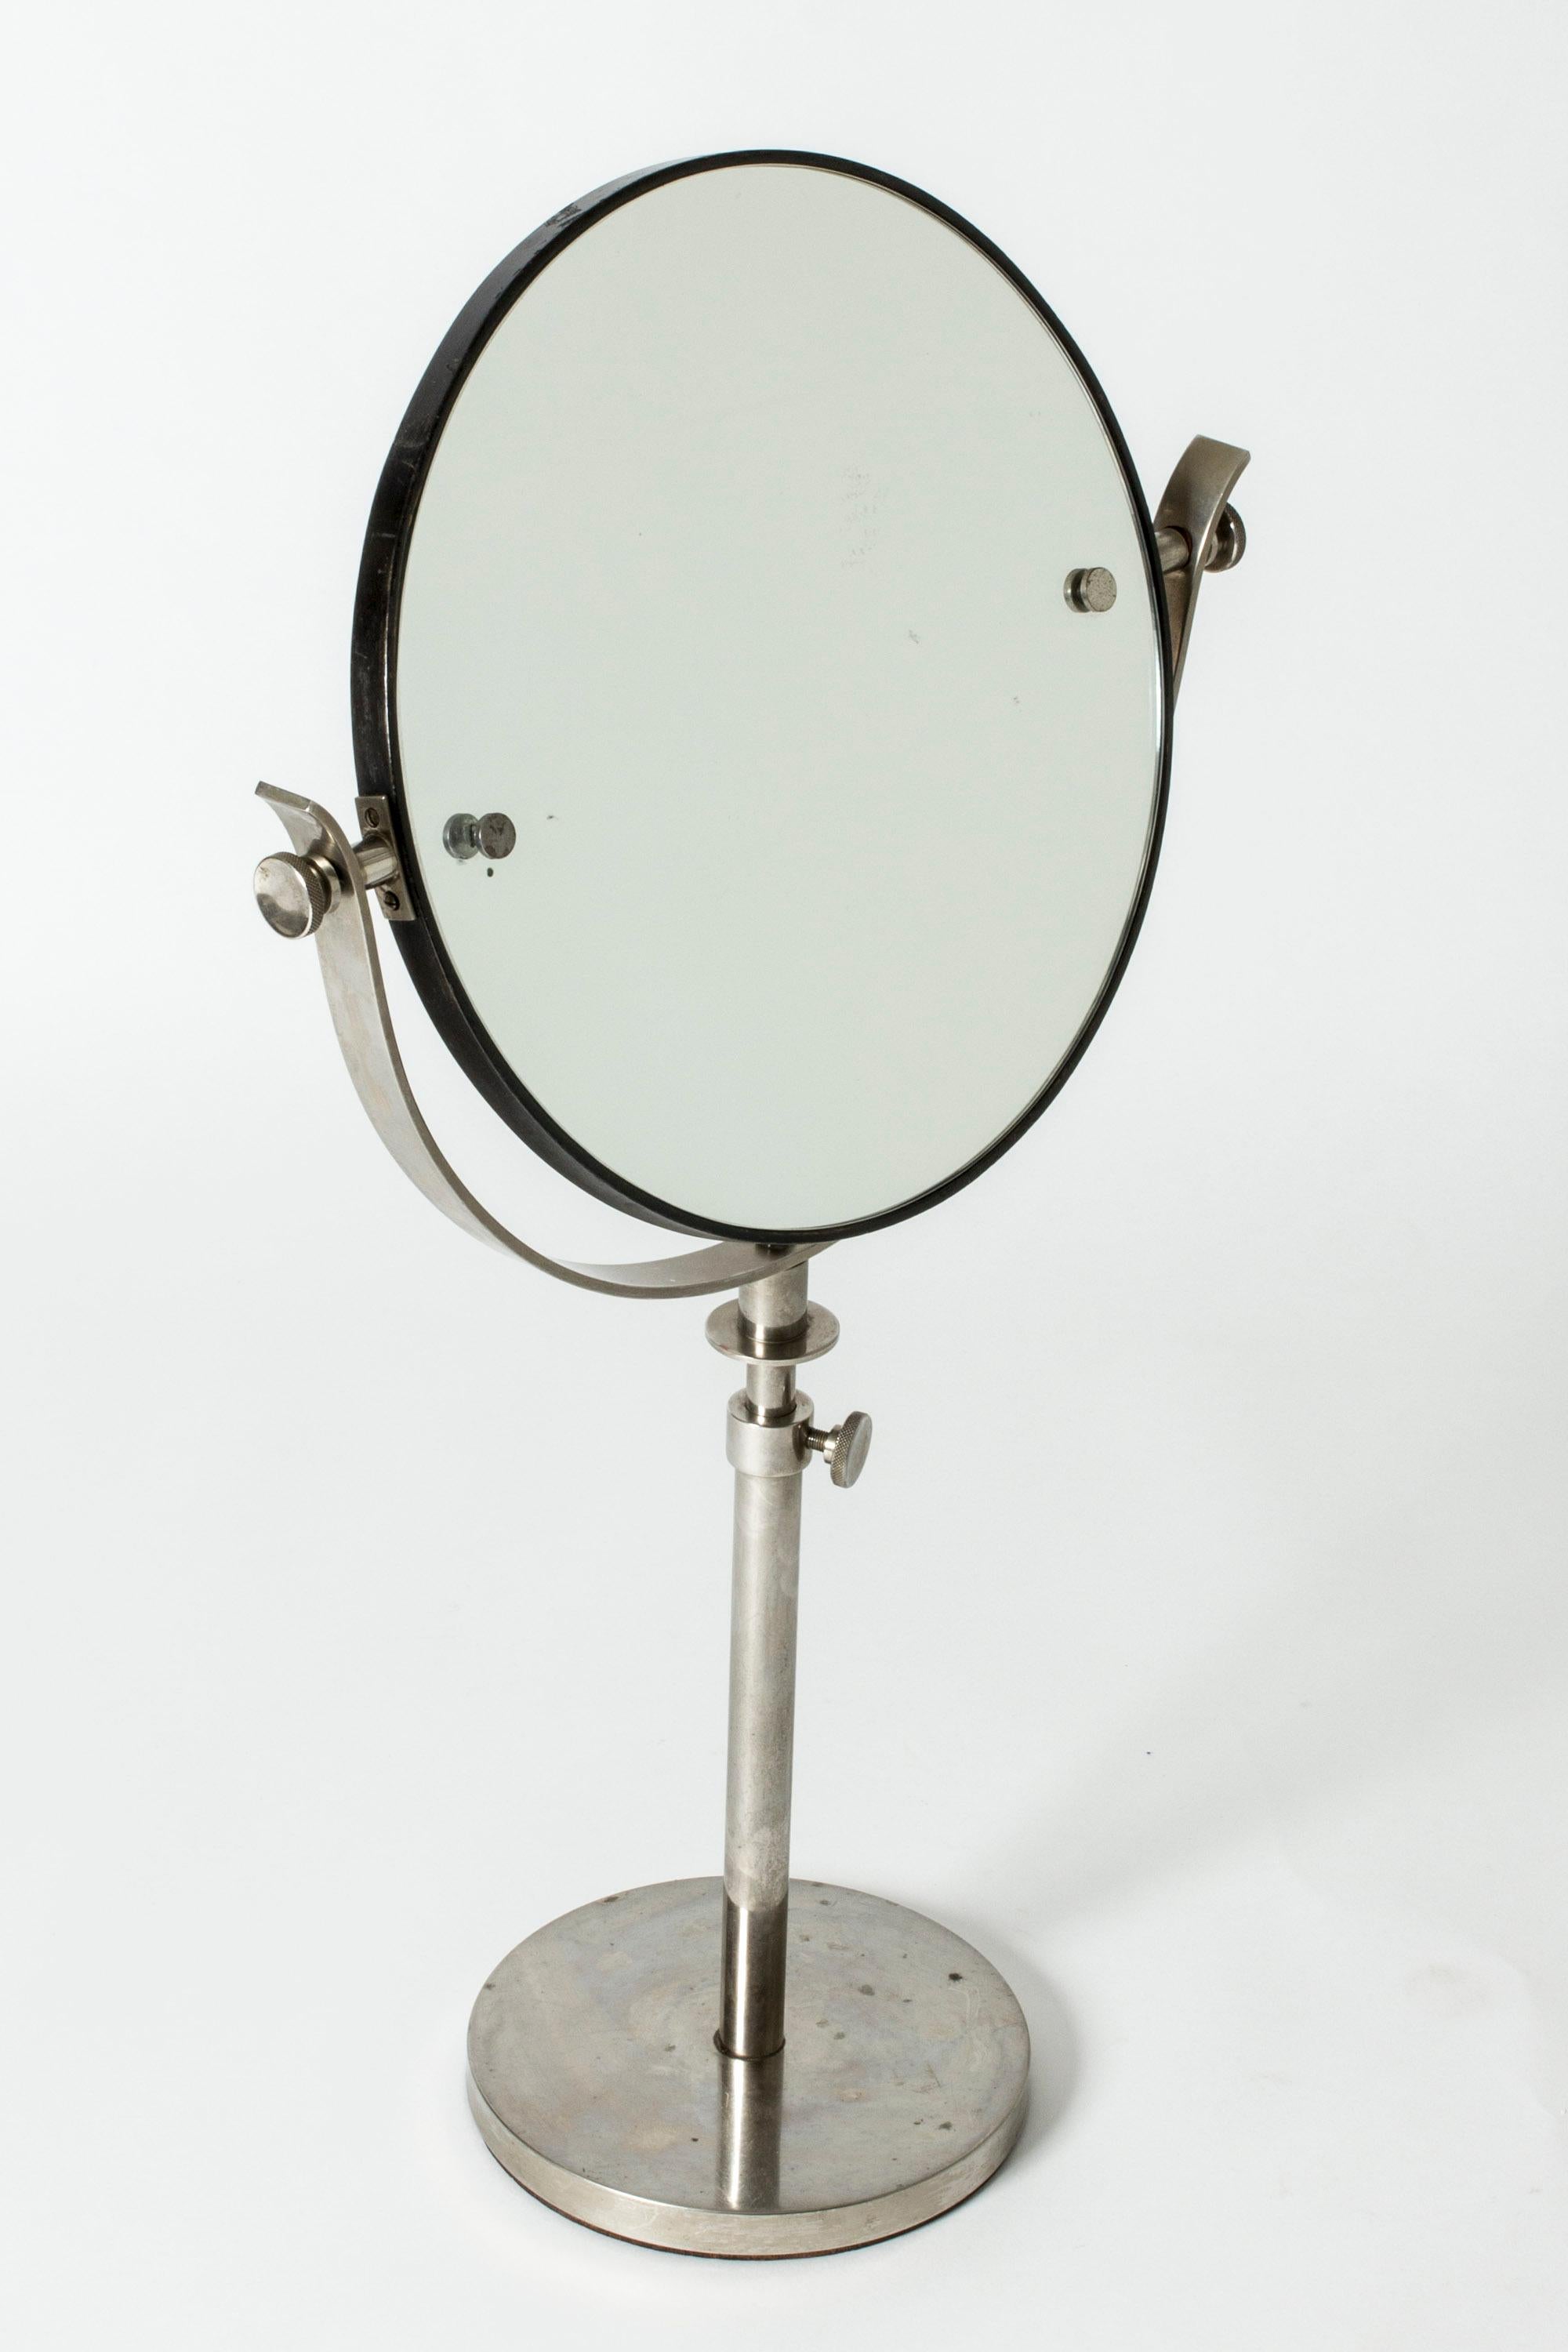 Elegant table mirror, with beautiful details. Made in white metal. Elongated design, adjustable height, 77-91 cm.